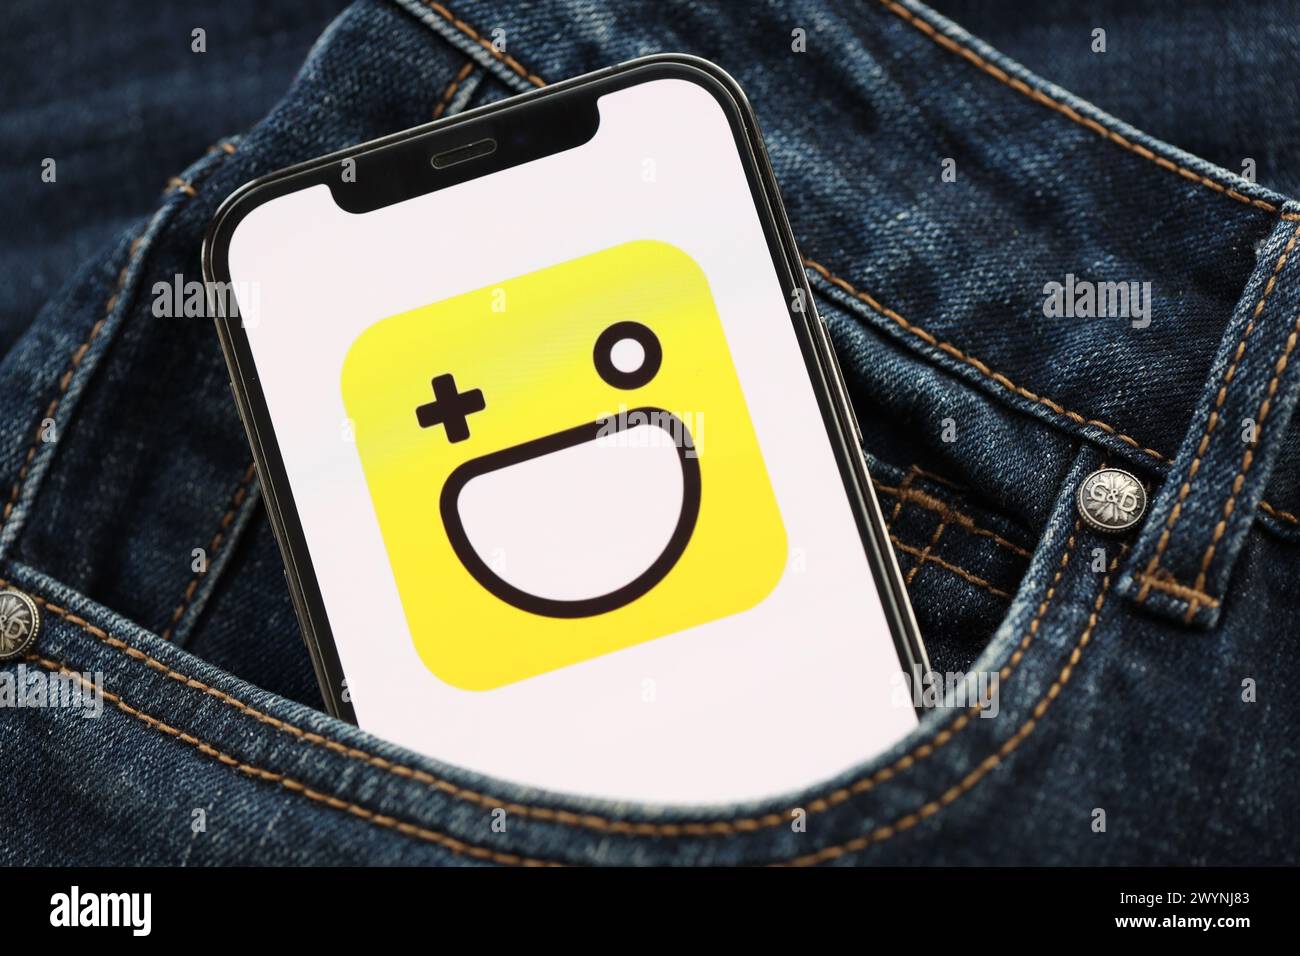 KYIV, UKRAINE - APRIL 1, 2024 Hago icon on smartphone display screen in jeans pocket. iPhone display with app logo hide in fashionable denims pocket close up Stock Photo